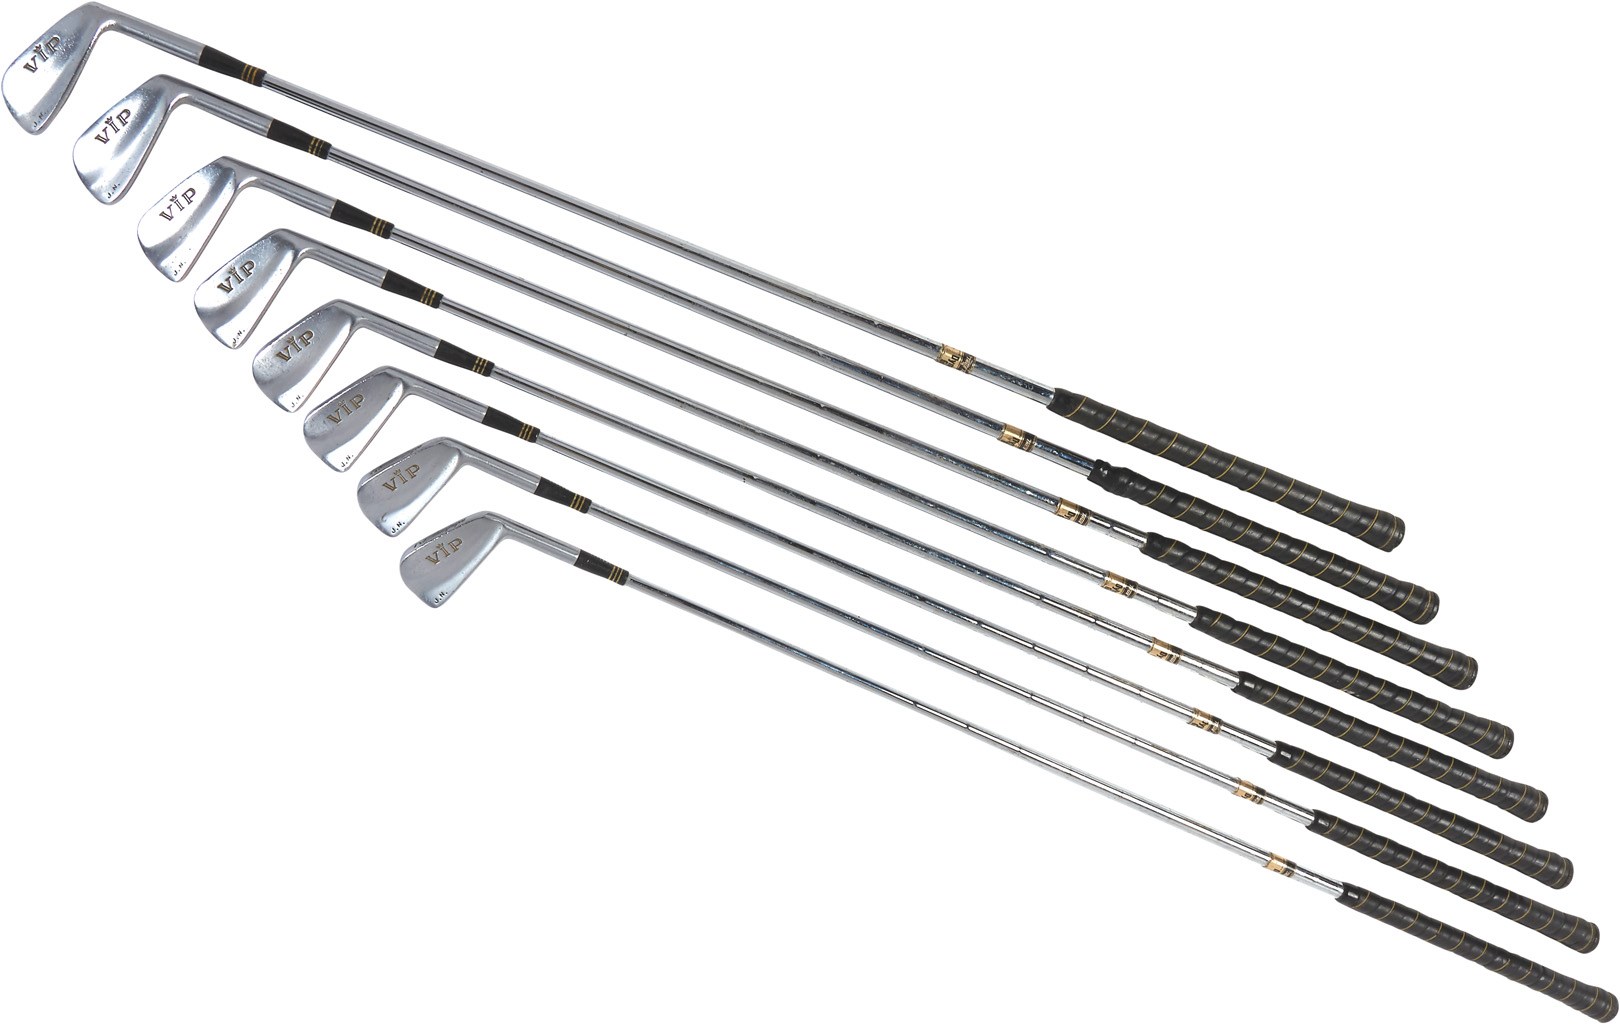 Olympics and All Sports - Jack Nicklaus Tournament Used Set of 8 Irons (Nicklaus LOA)